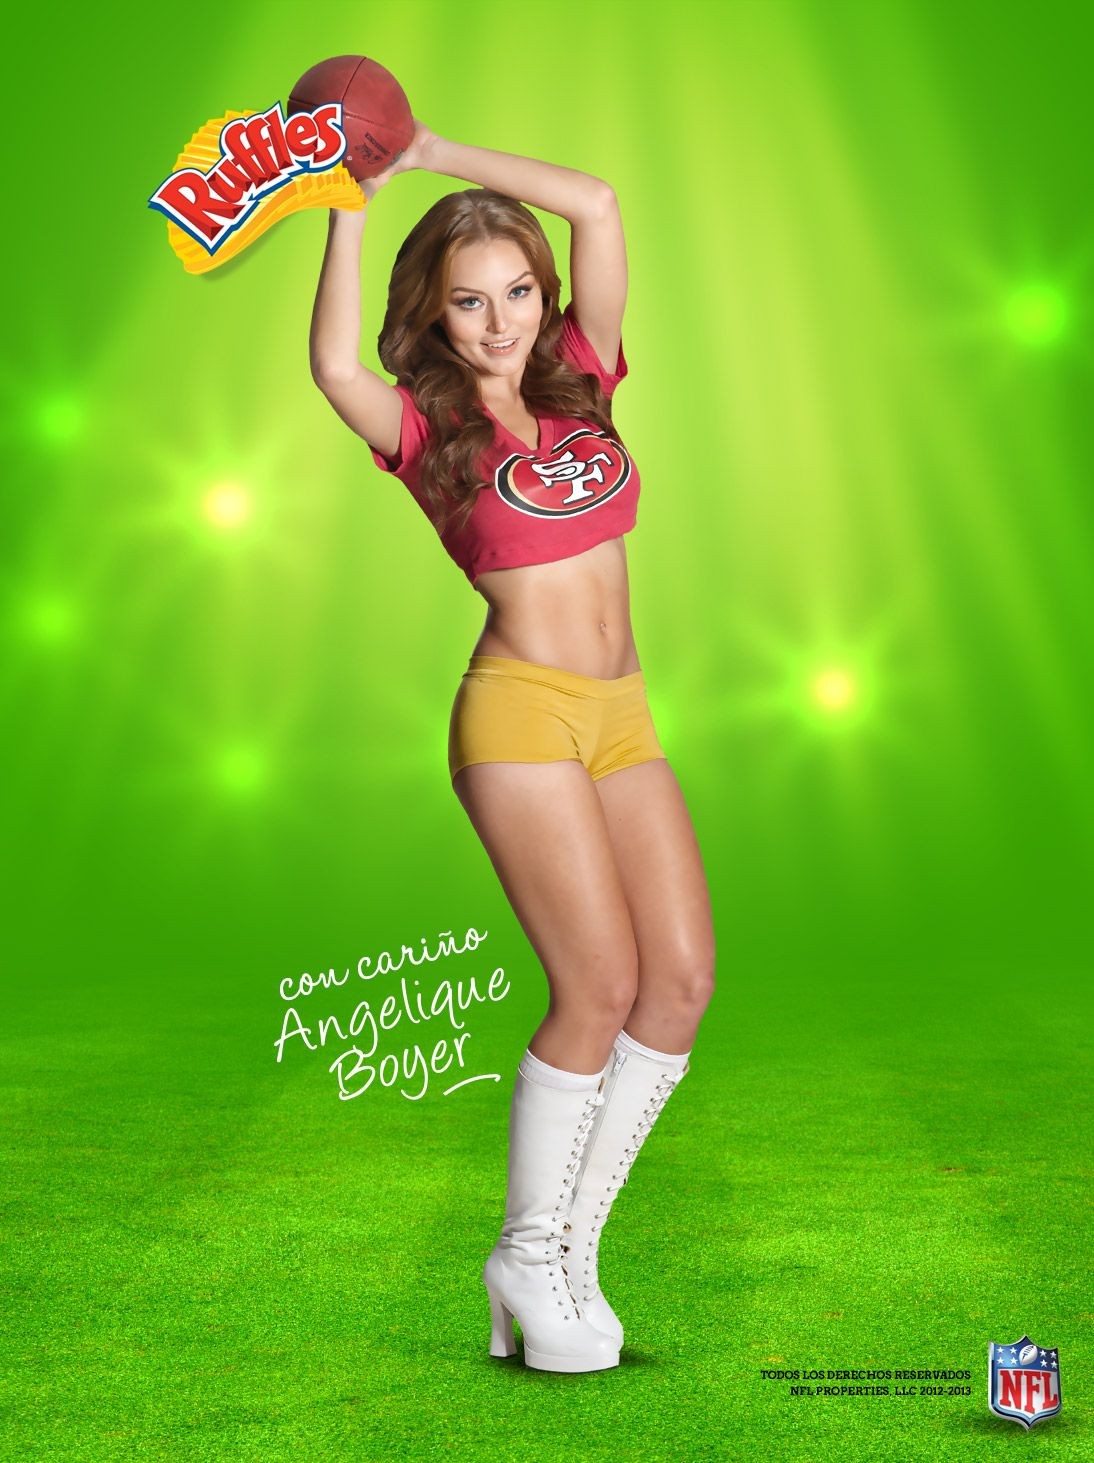 Angelique Boyer wearing sexy jersey look-alike outfits in NFL promos #75243026